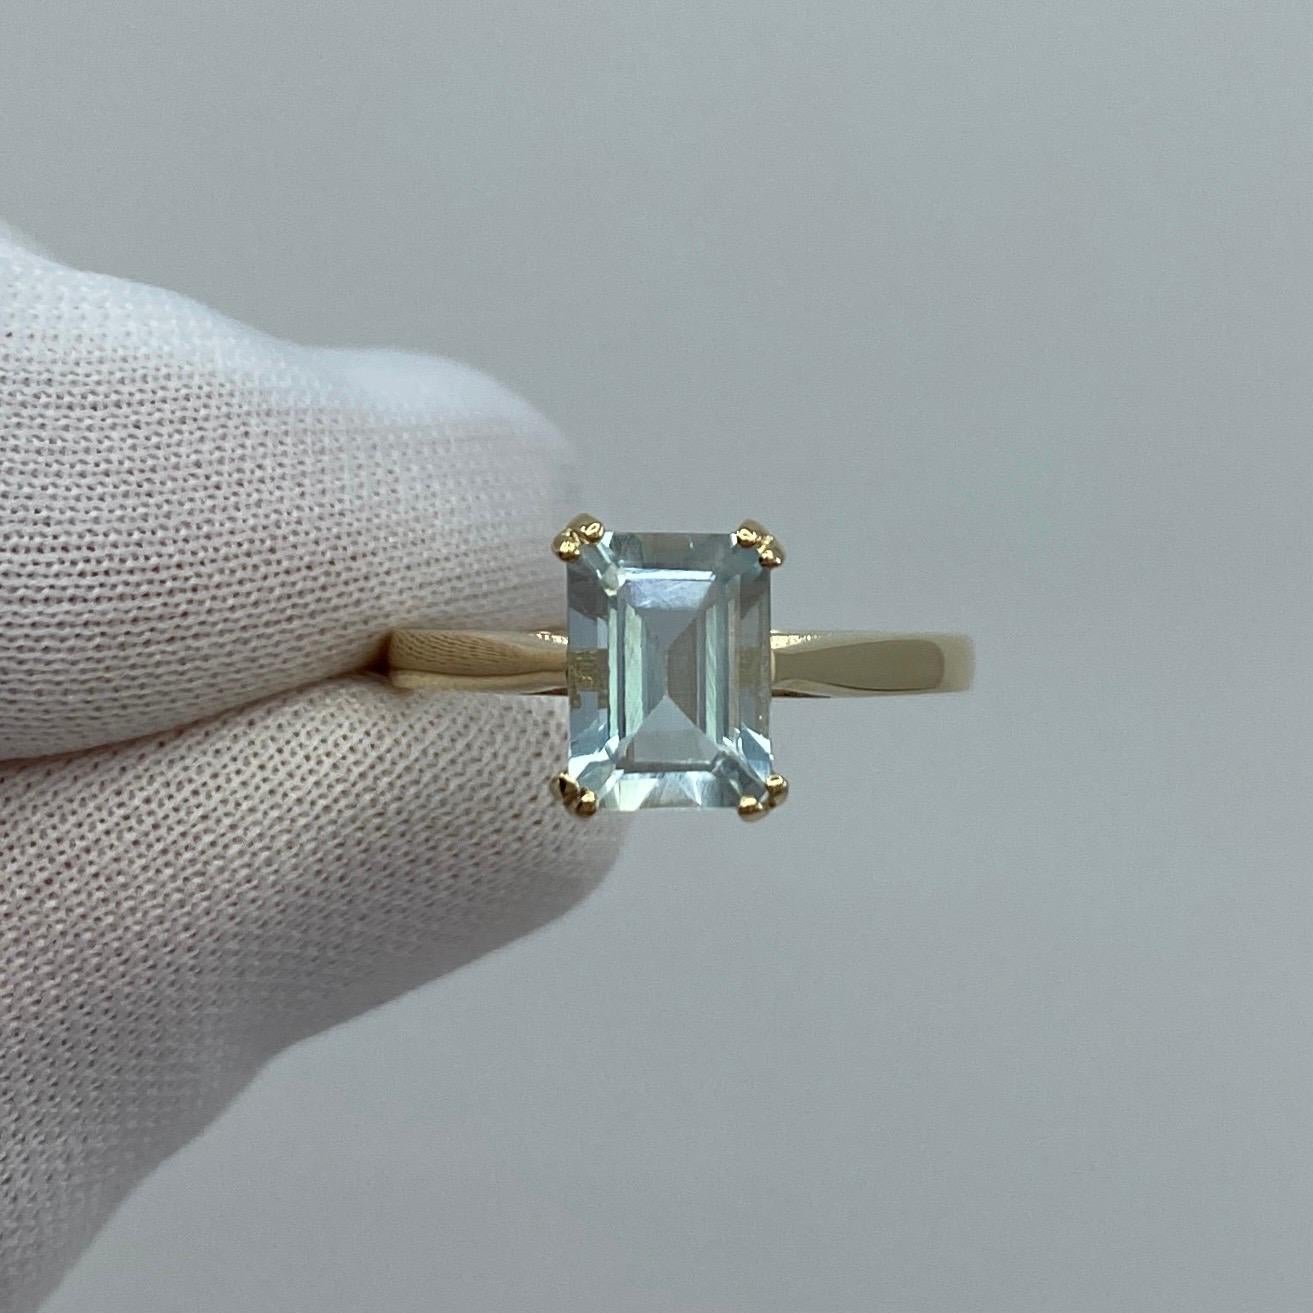 Light Blue Emerald Cut Aquamarine Solitaire Ring

1.50 Carat aquamarine with a stunning bright blue colour and good clarity, some small natural inclusions visible (as shown in photos) but not a dirty stone. Also has an excellent quality emerald cut